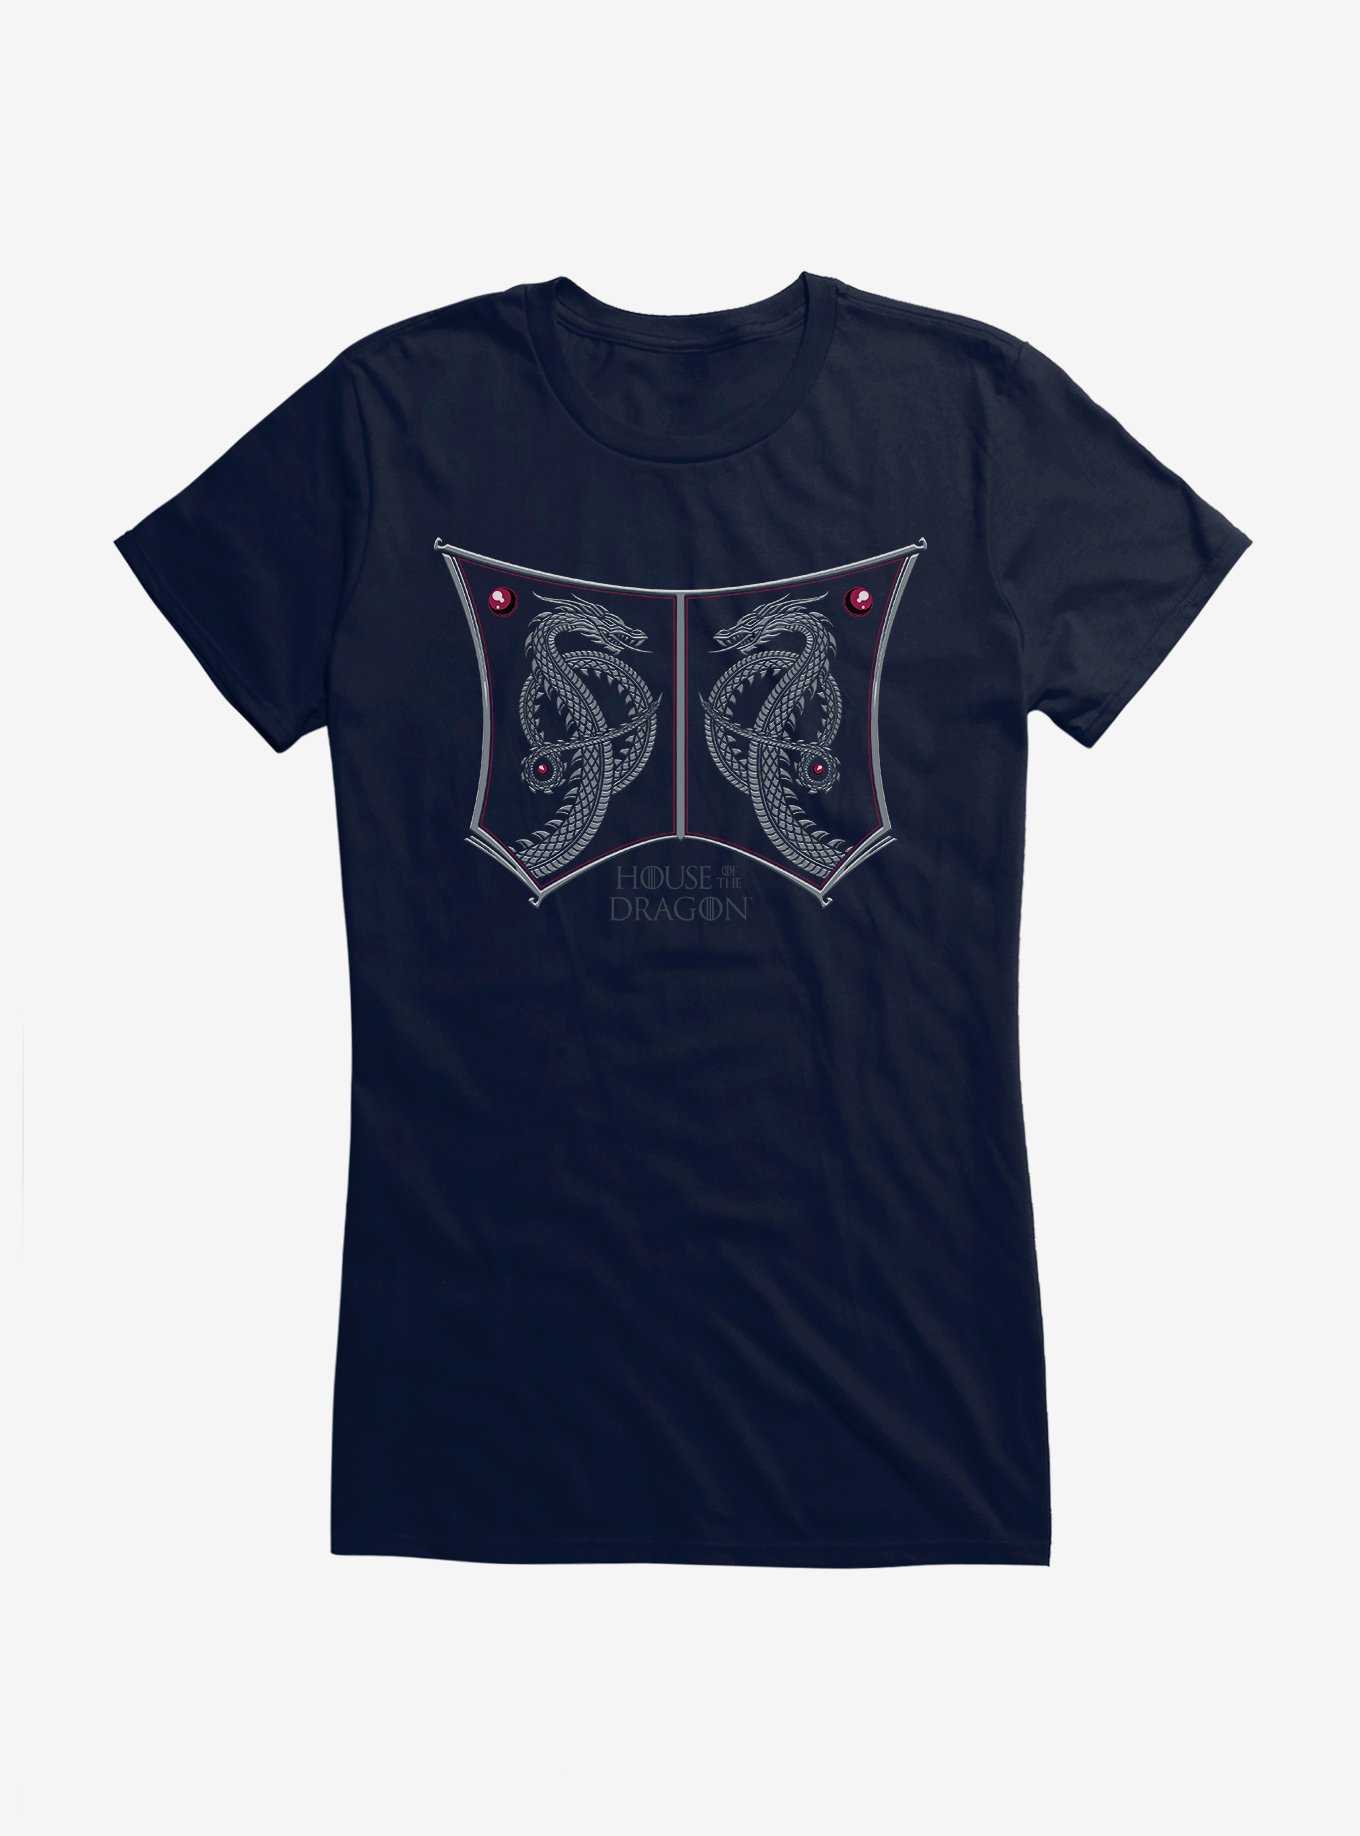 House of the Dragon Twin Dragons Girls T-Shirt, , hi-res